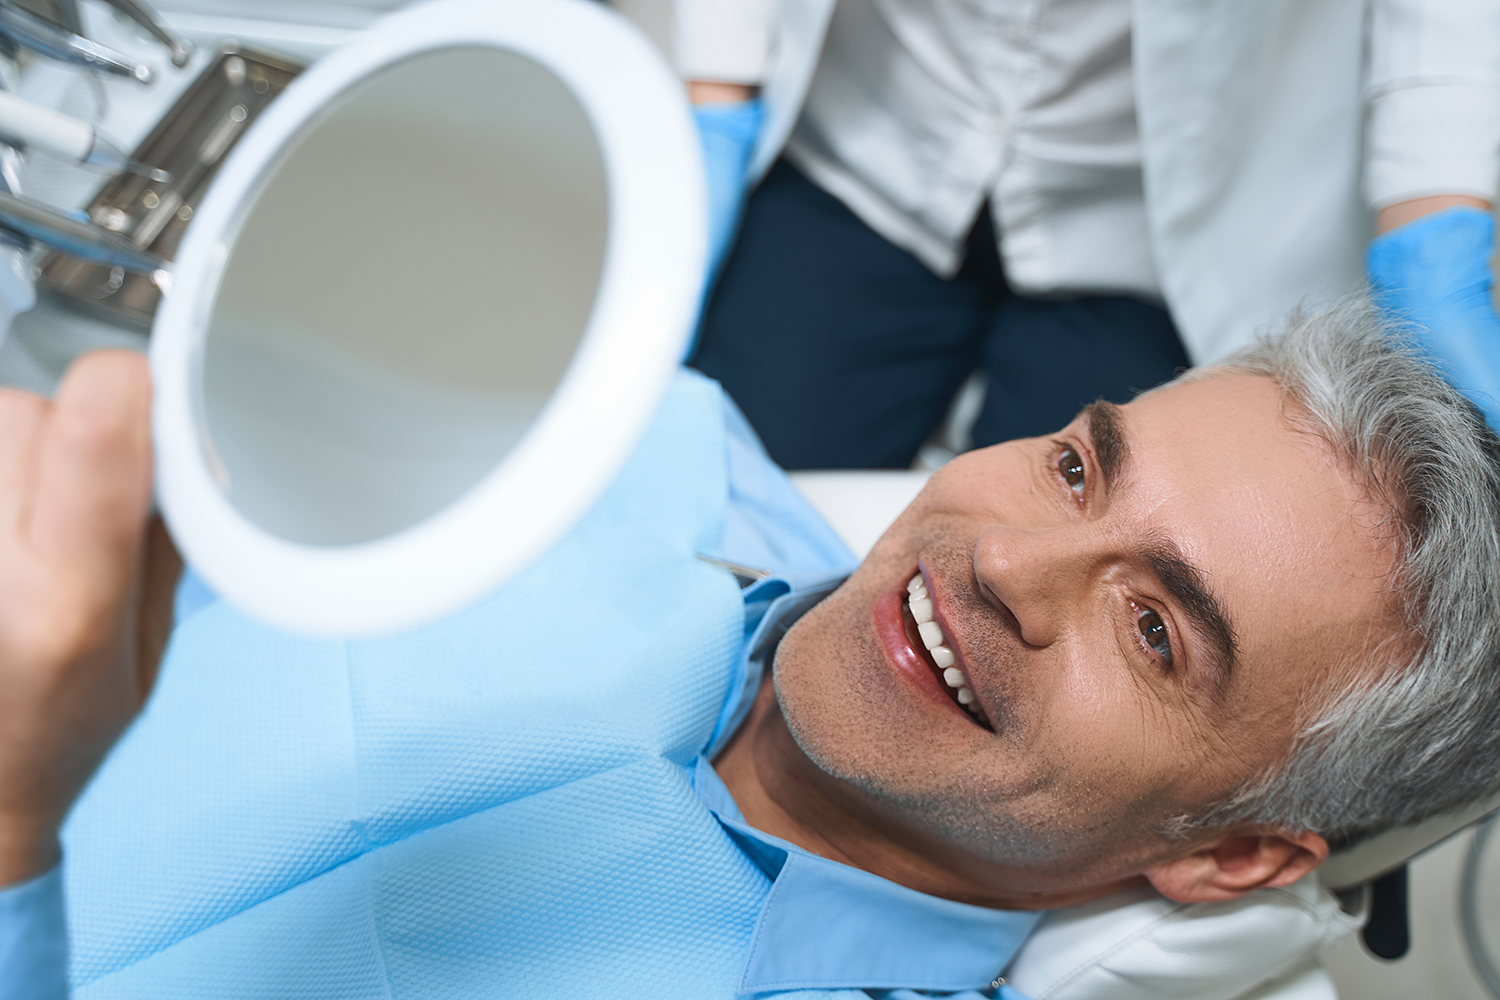 guy smiling looking at himself in a mirror while getting his teeth done